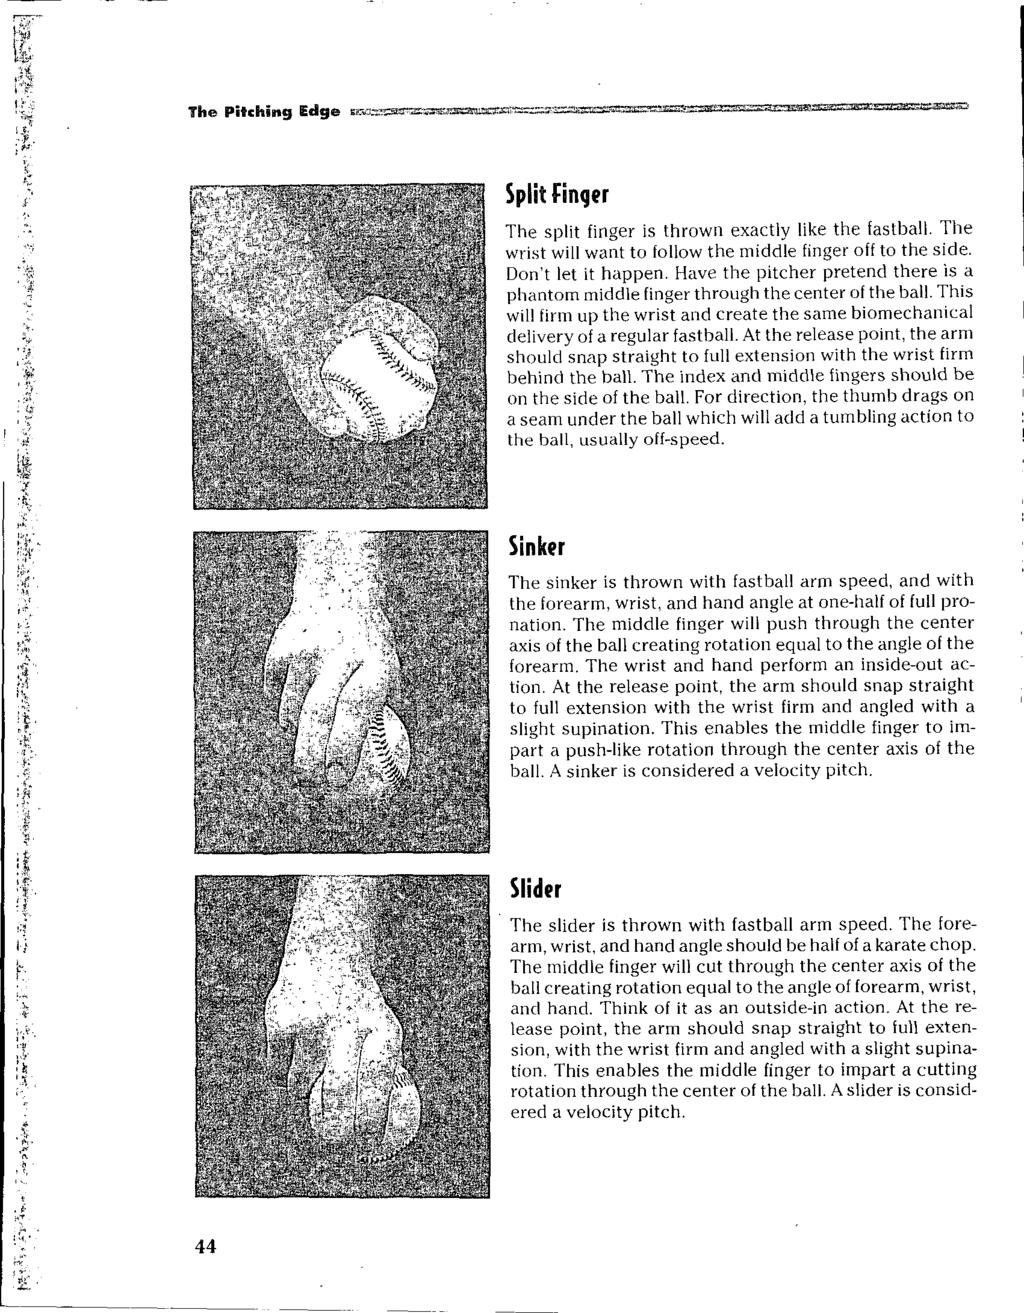 The Pitching Edge ea telneze". ==a4=.,'"'77 ^Prt Split Finger The split finger is thrown exactly like the fastball. The wrist will want to follow the middle finger off to the side.